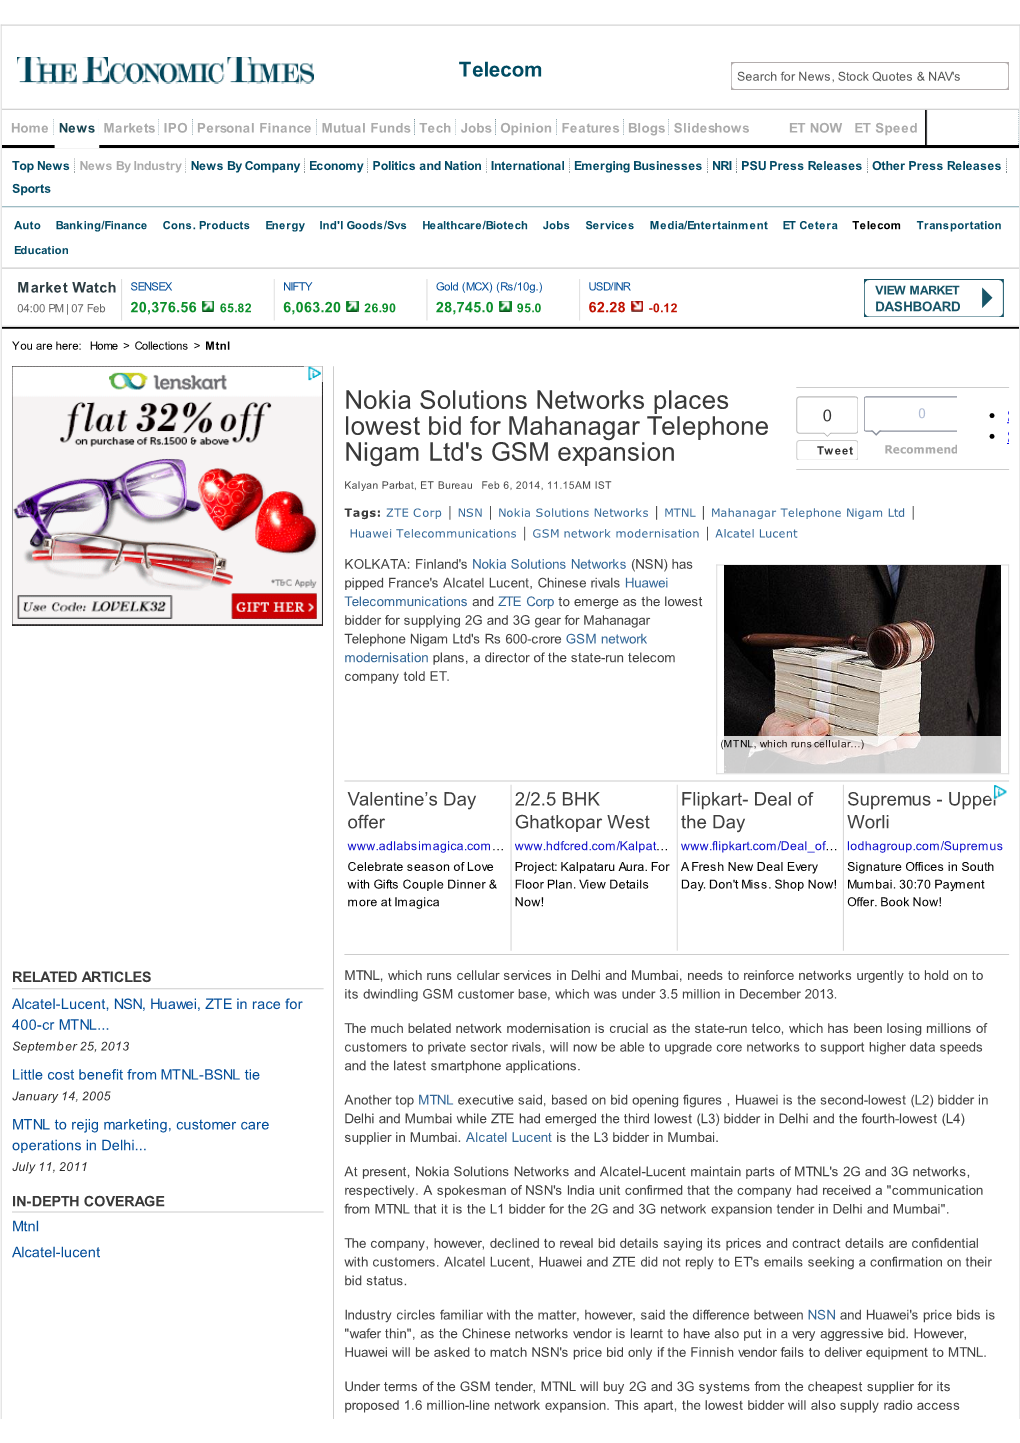 Nokia Solutions Networks Places Lowest Bid for Mahanagar